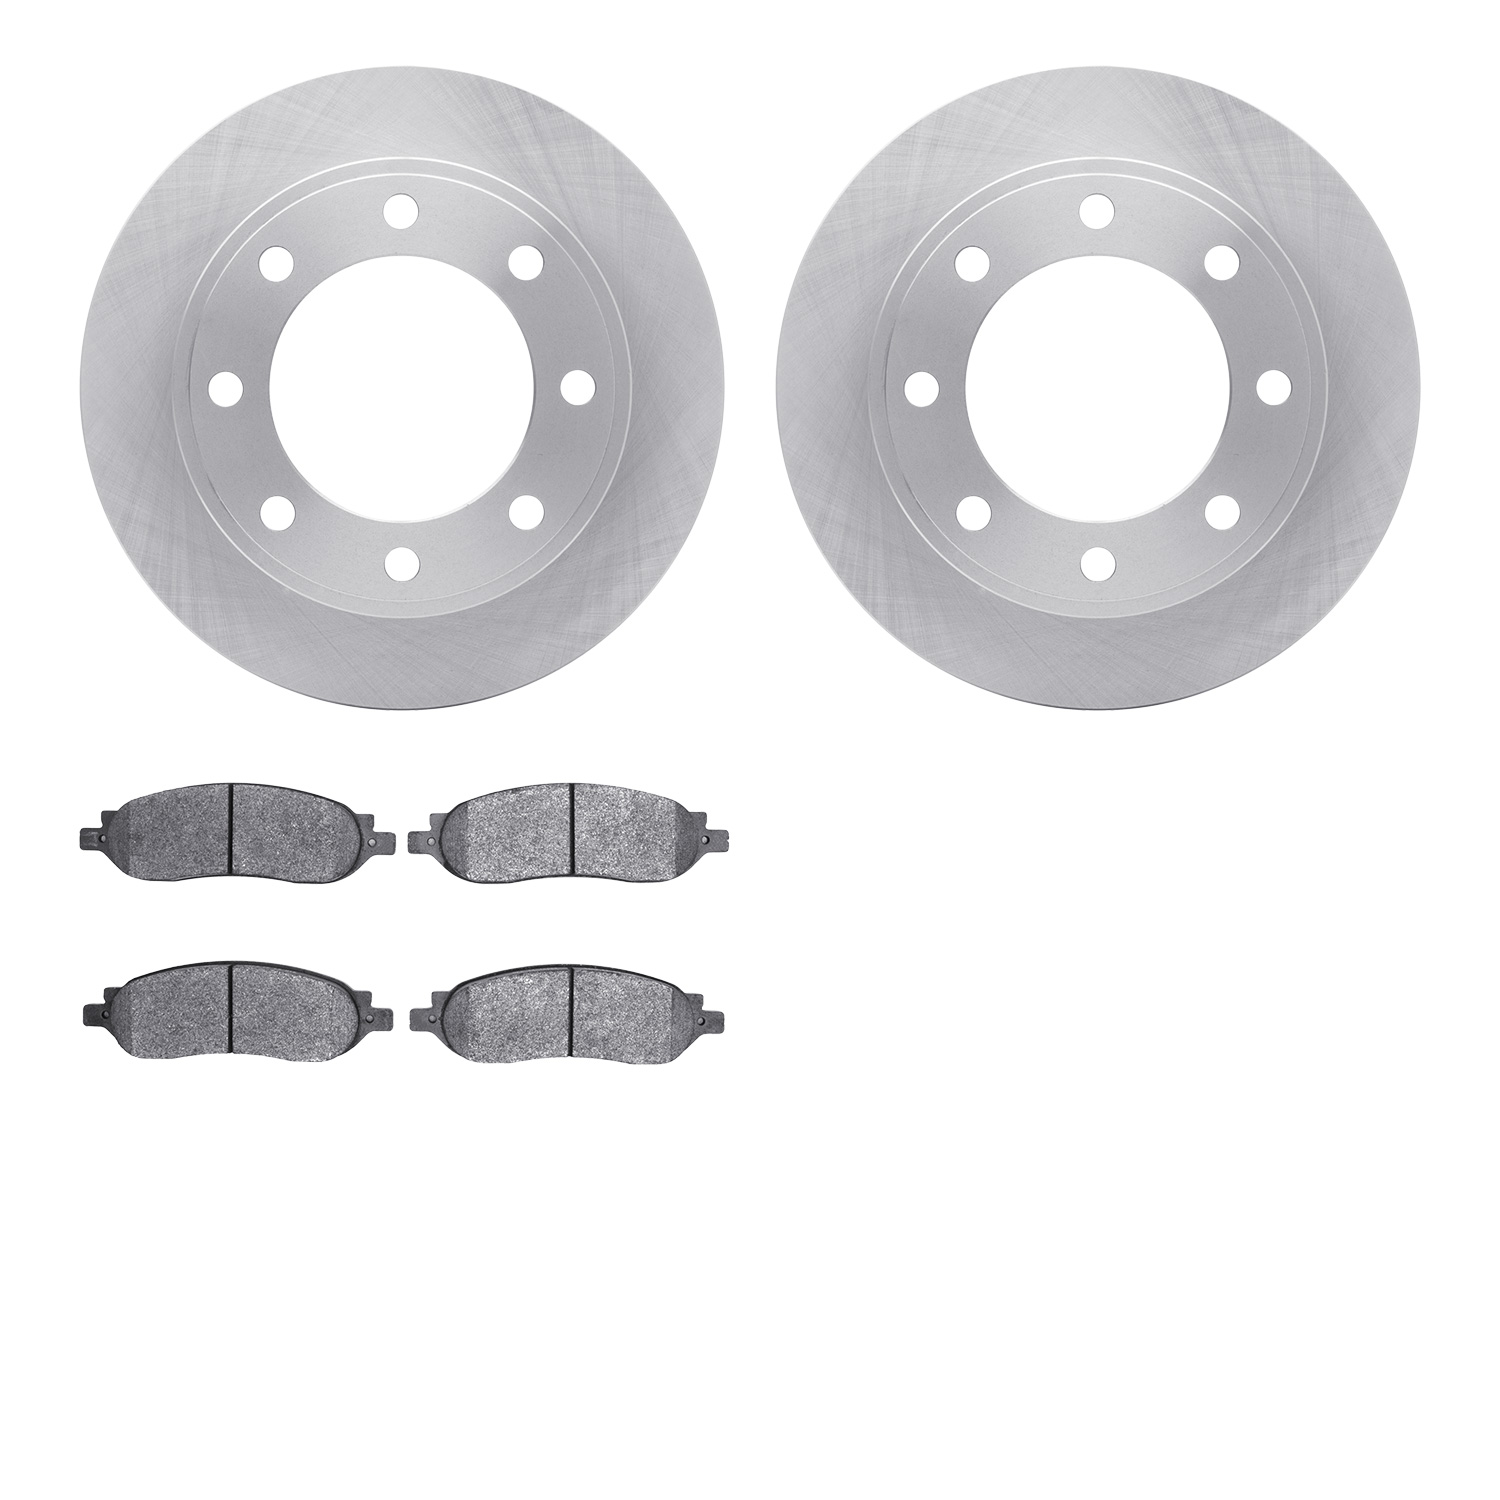 6402-54243 Brake Rotors with Ultimate-Duty Brake Pads, 2005-2007 Ford/Lincoln/Mercury/Mazda, Position: Rear